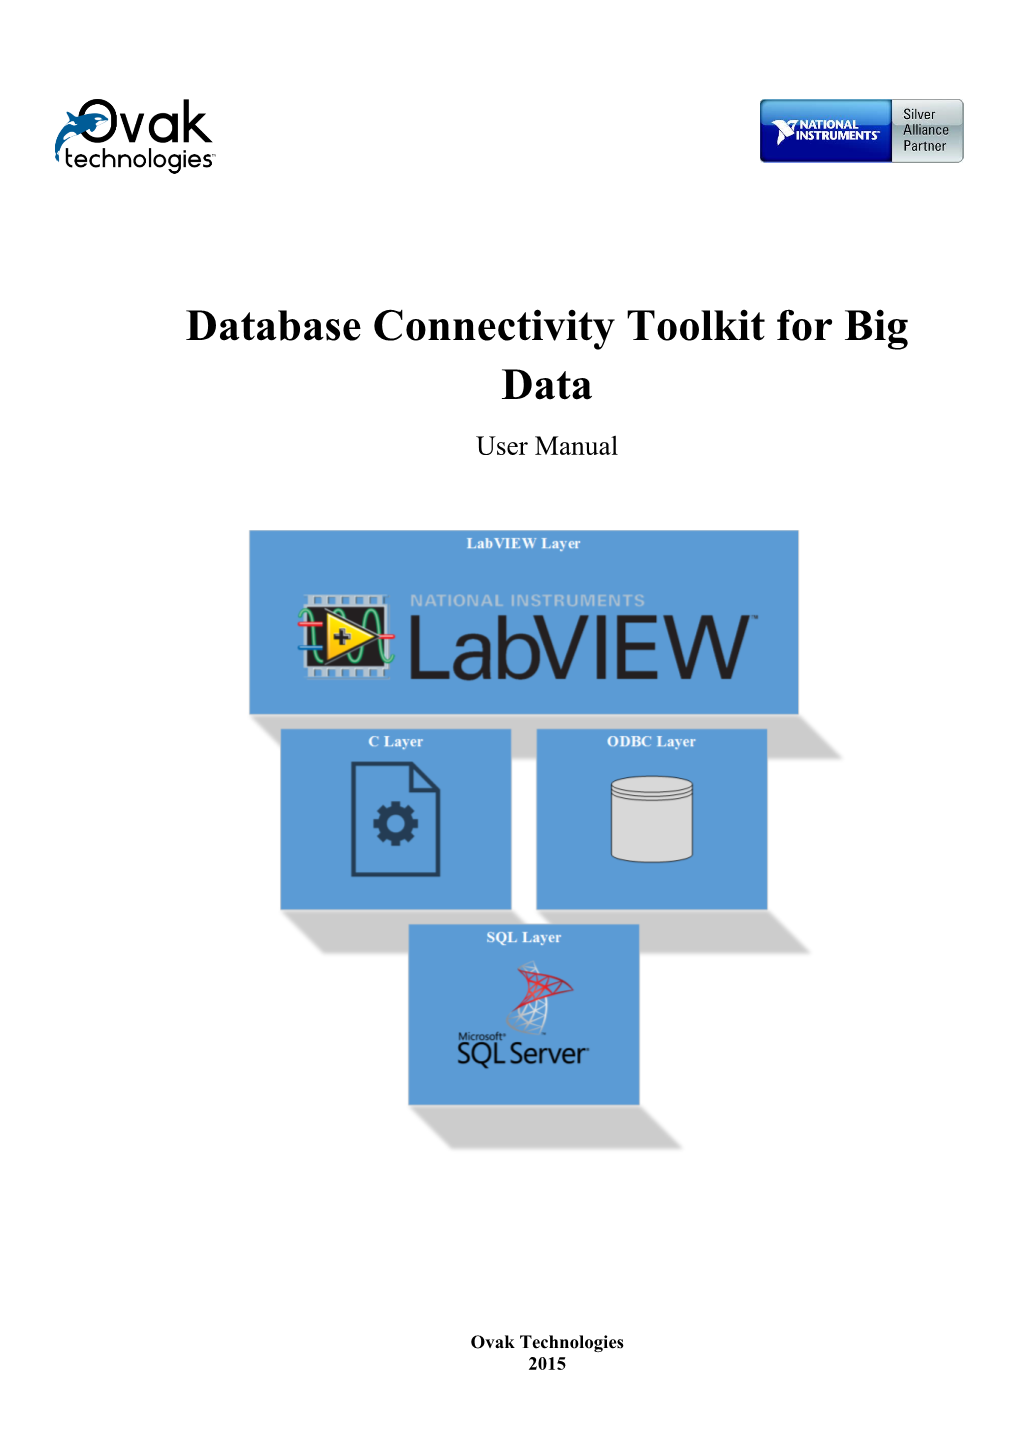 Database Connectivity Toolkit for Big Data User Manual